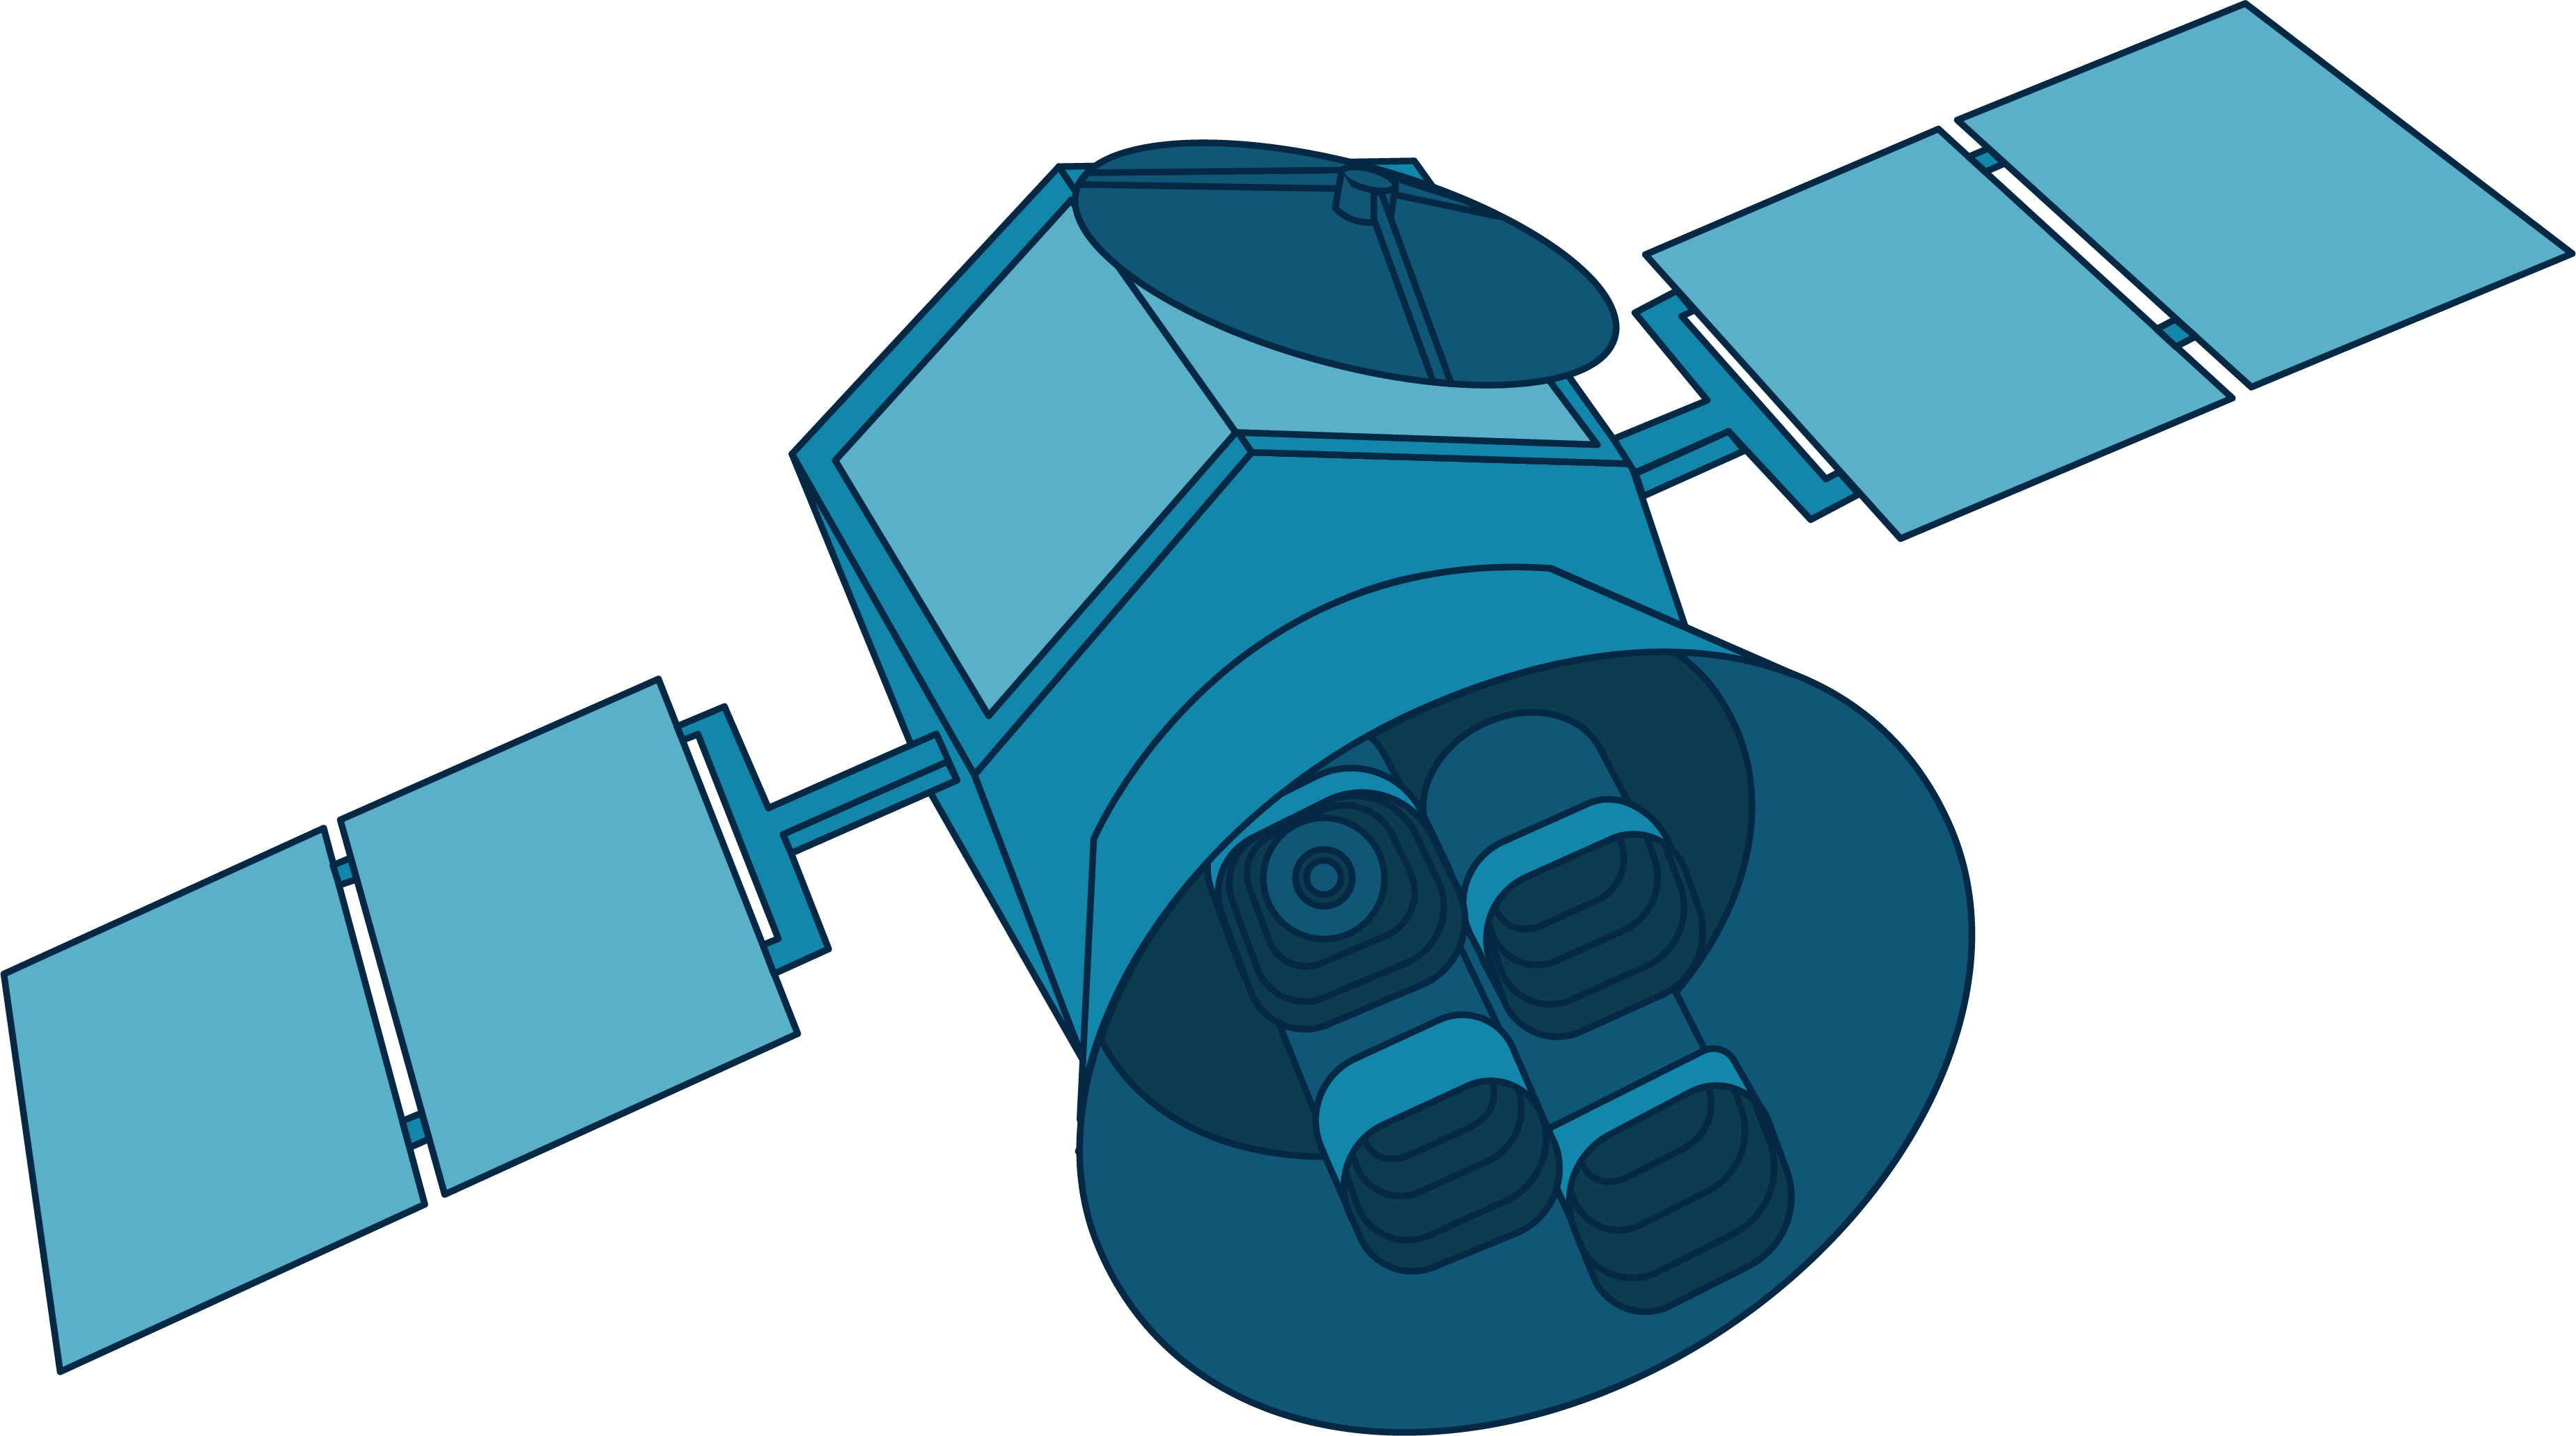 This illustration of NASA's TESS shows the spacecraft in shades of blue. The multi-sided, cylindrical shaped main body of the satellite has two solar array "wings," each extending out from the sides of the satellite which is attached to an open, cone shaped bottom piece. Nestled inside the cone are four squares which show the relative positions of TESS’s cameras.